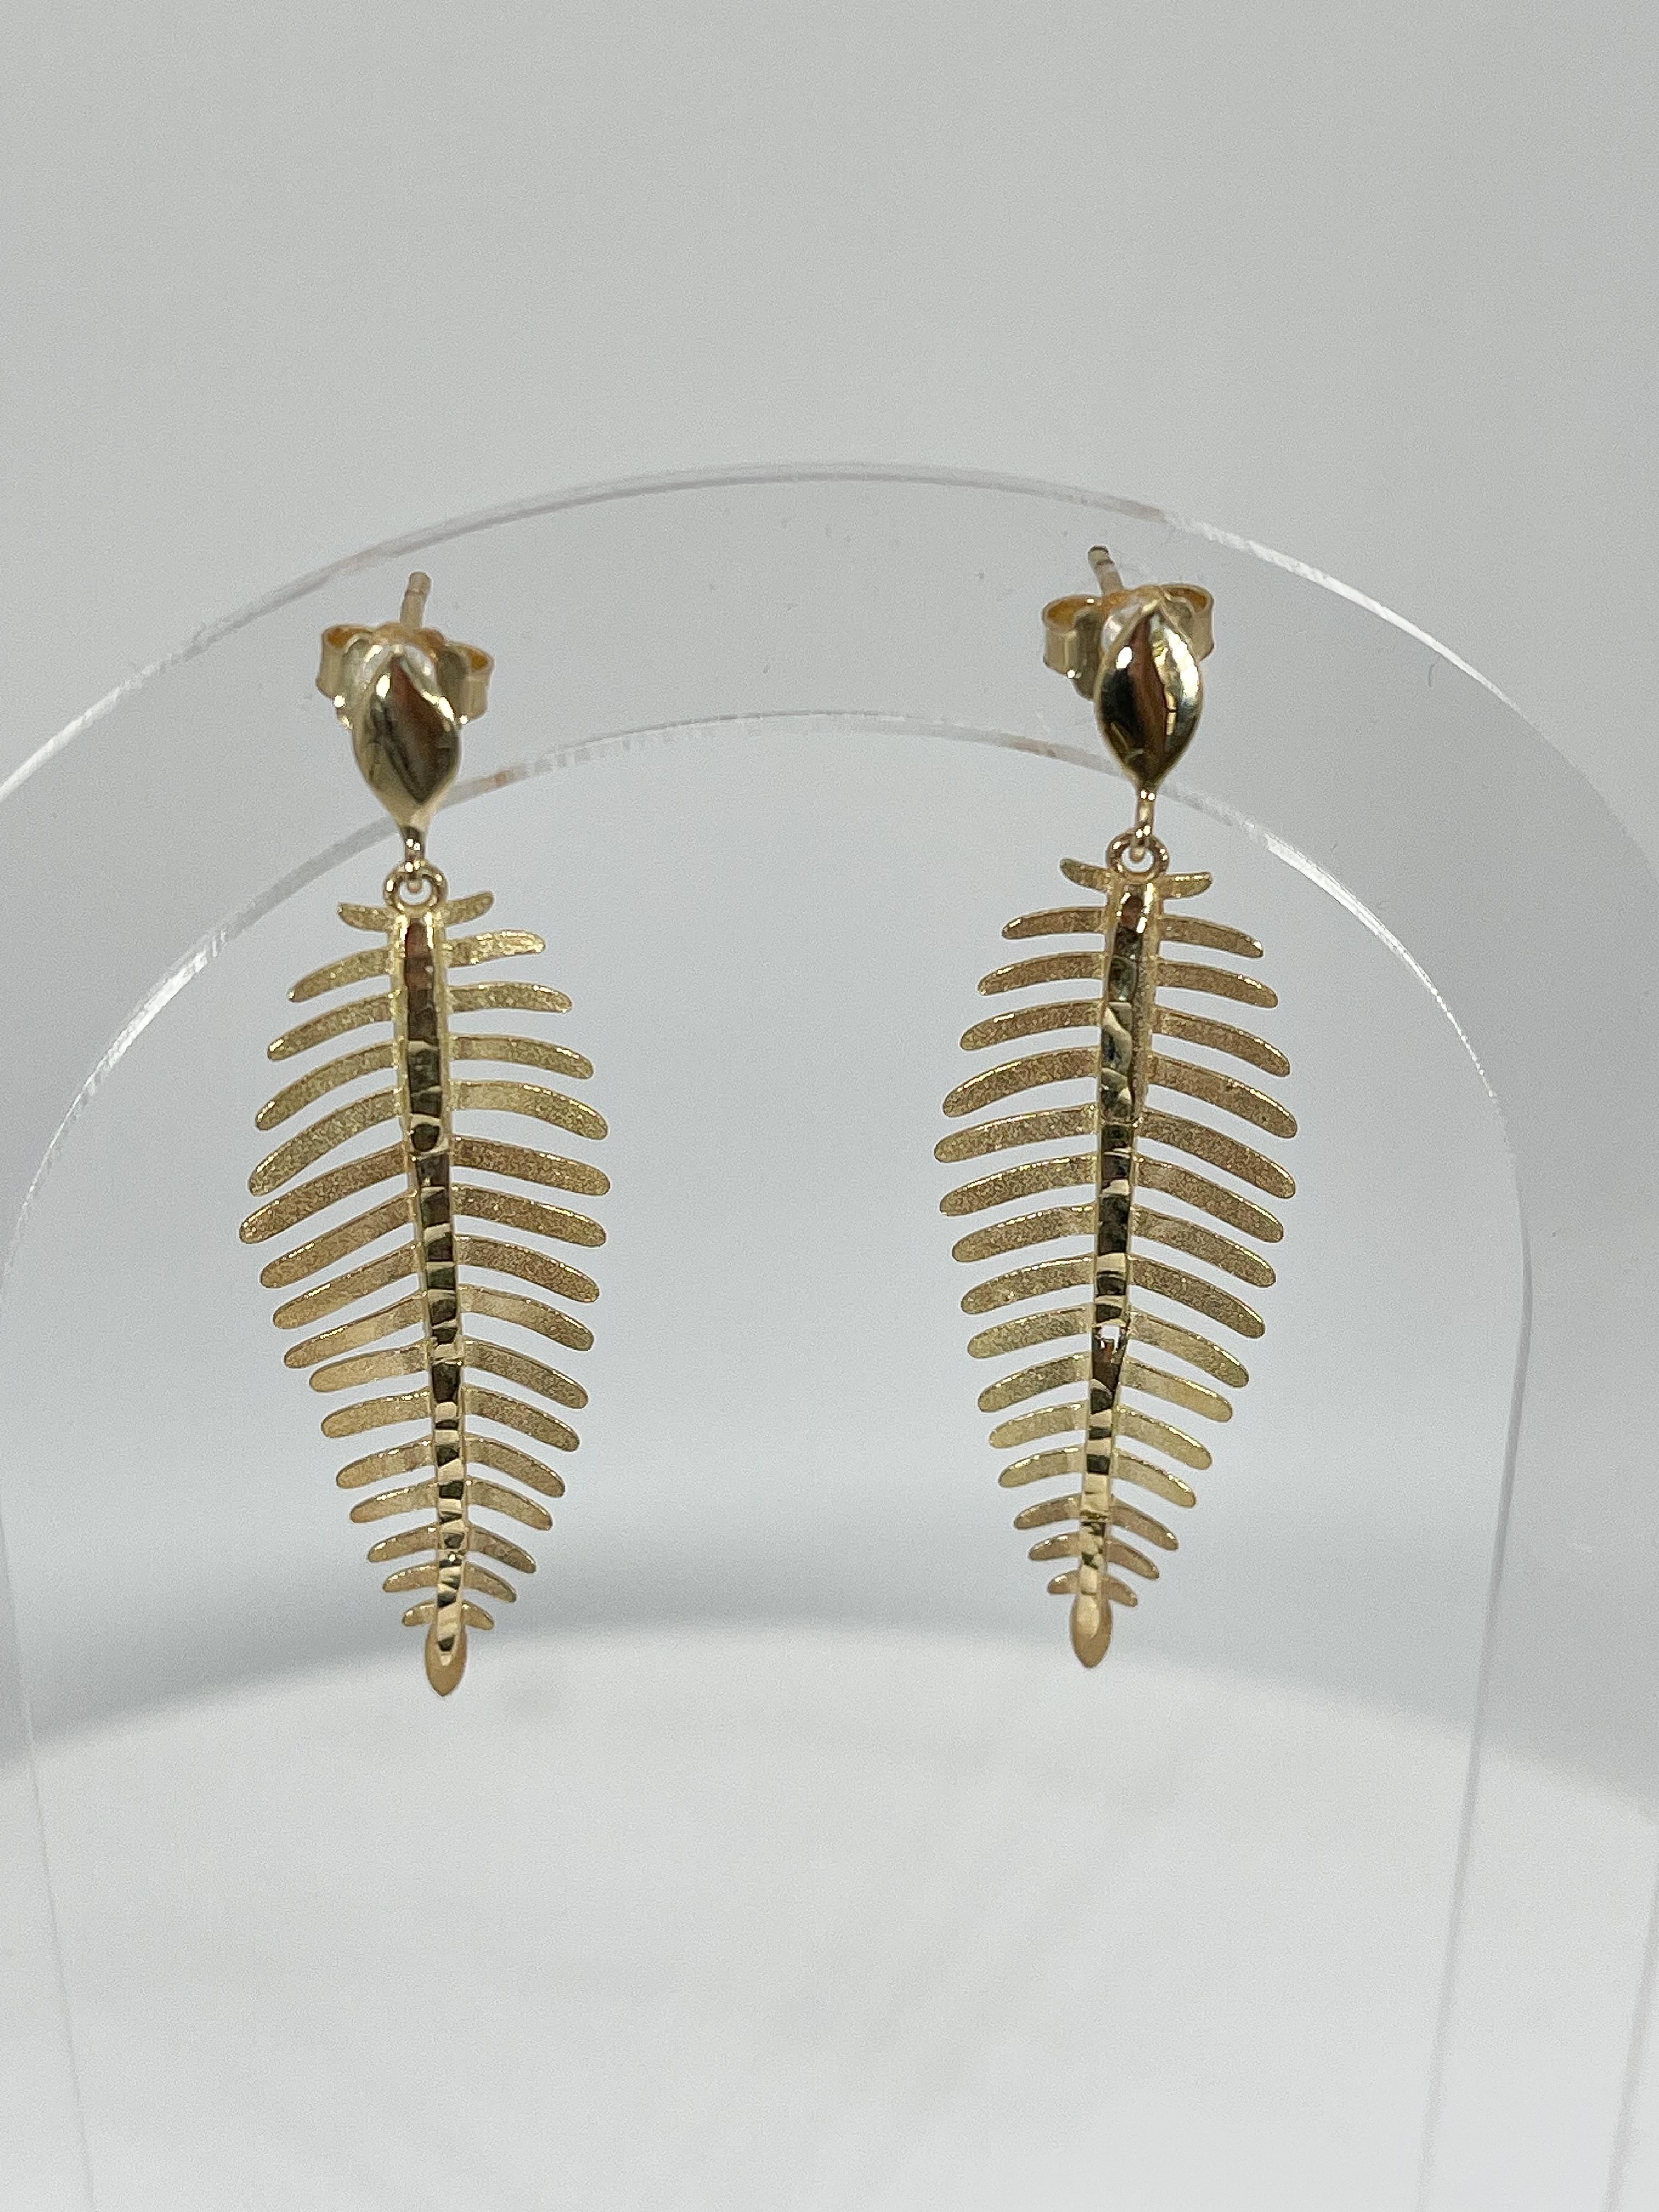 14k yellow gold feather dangle earrings. These earrings measure to be 50mm x 14mm, they have a friction back for wearing, and they have a total weight of 3.5 grams.